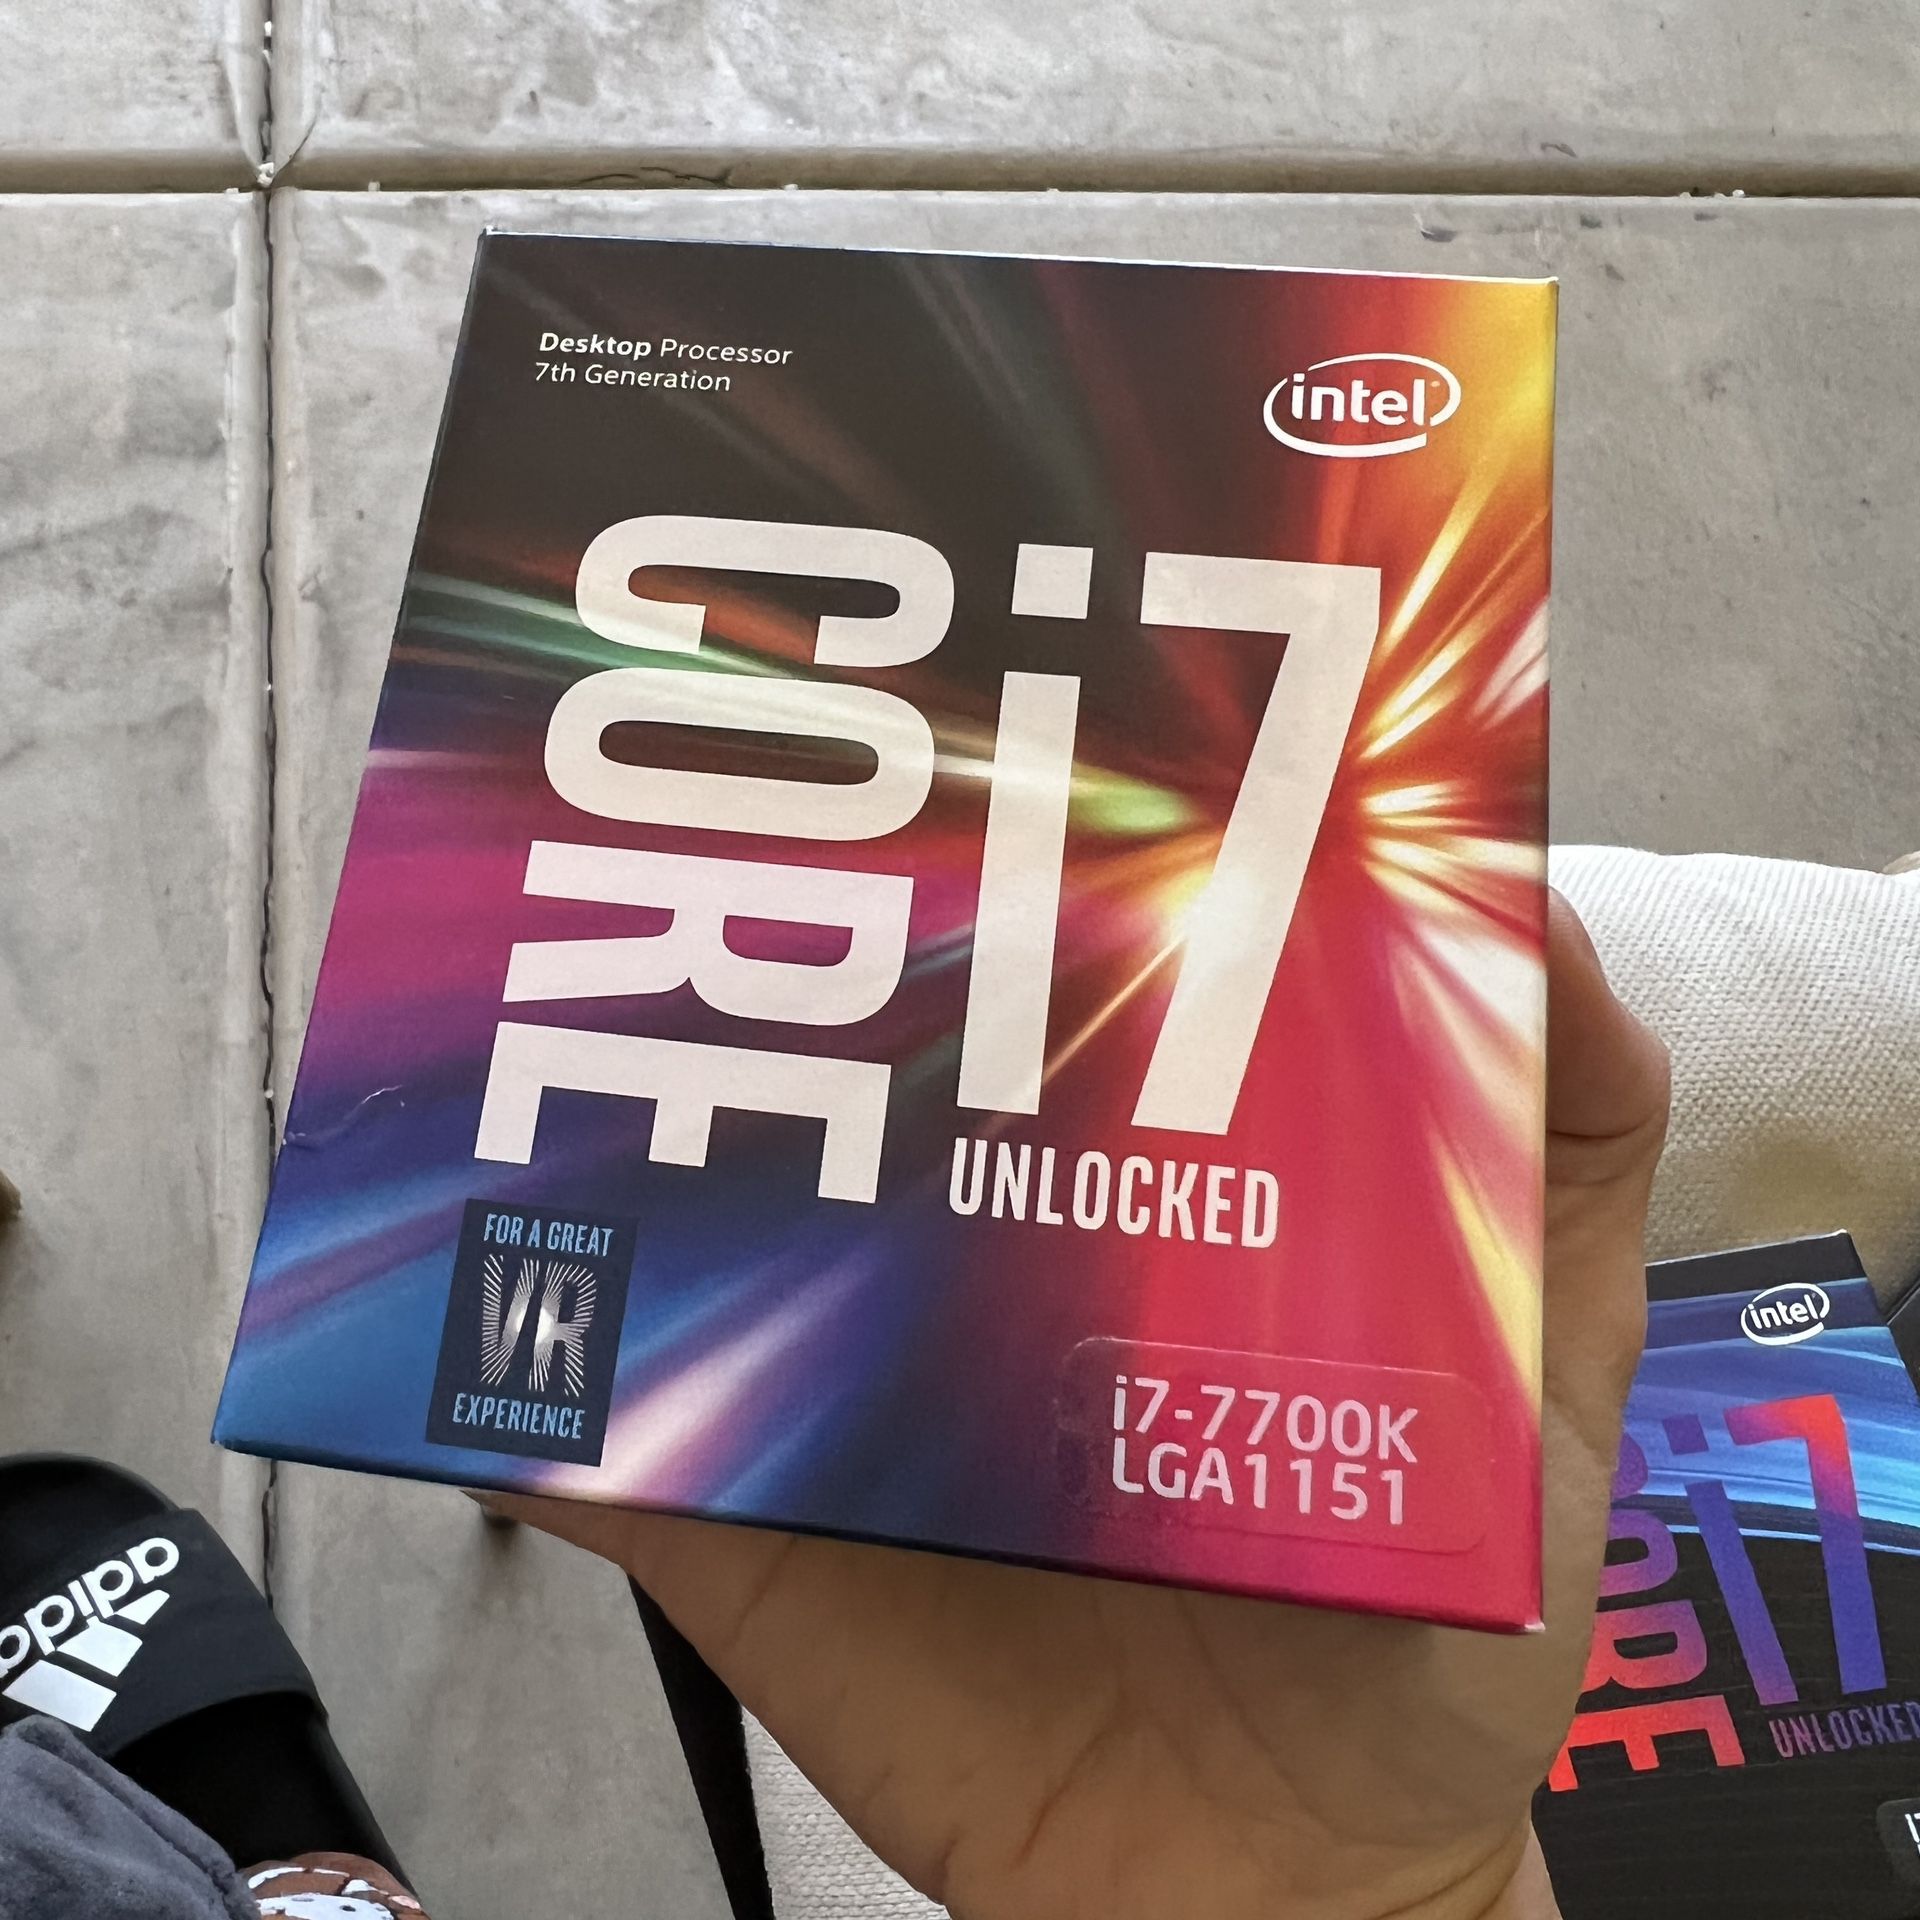 Intel Core i7-7700K Desktop Processor 4 Cores up to 4.5 GHz unlocked LGA  1151 100/200 Series 91W for Sale in Tigard, OR - OfferUp